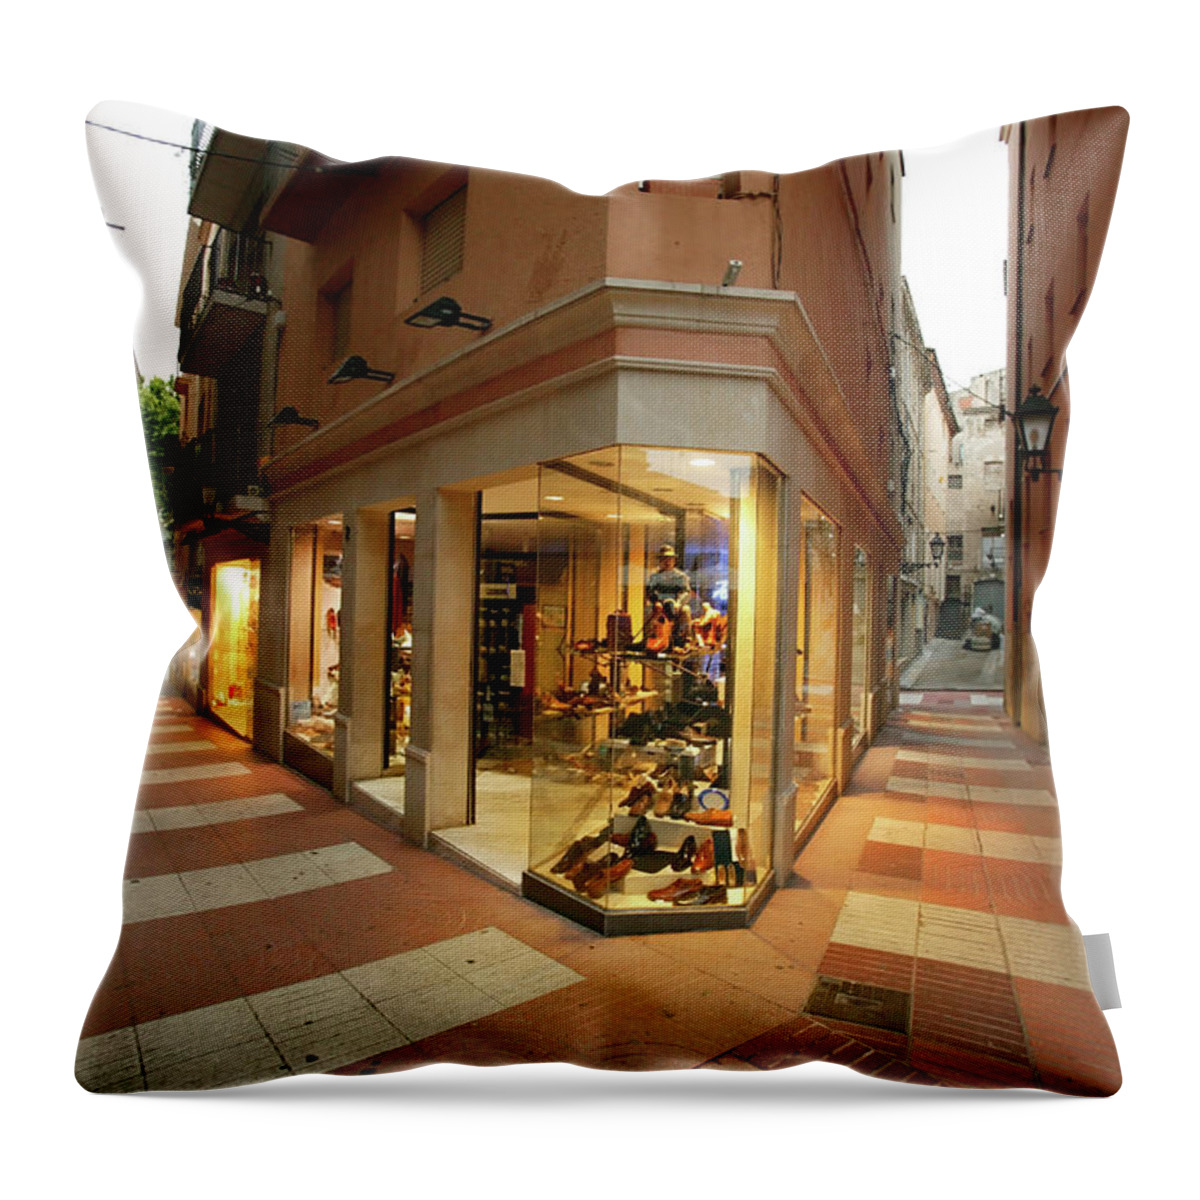 Pedestrian Throw Pillow featuring the photograph Small Shopping Street Figueras Spain by Mlenny